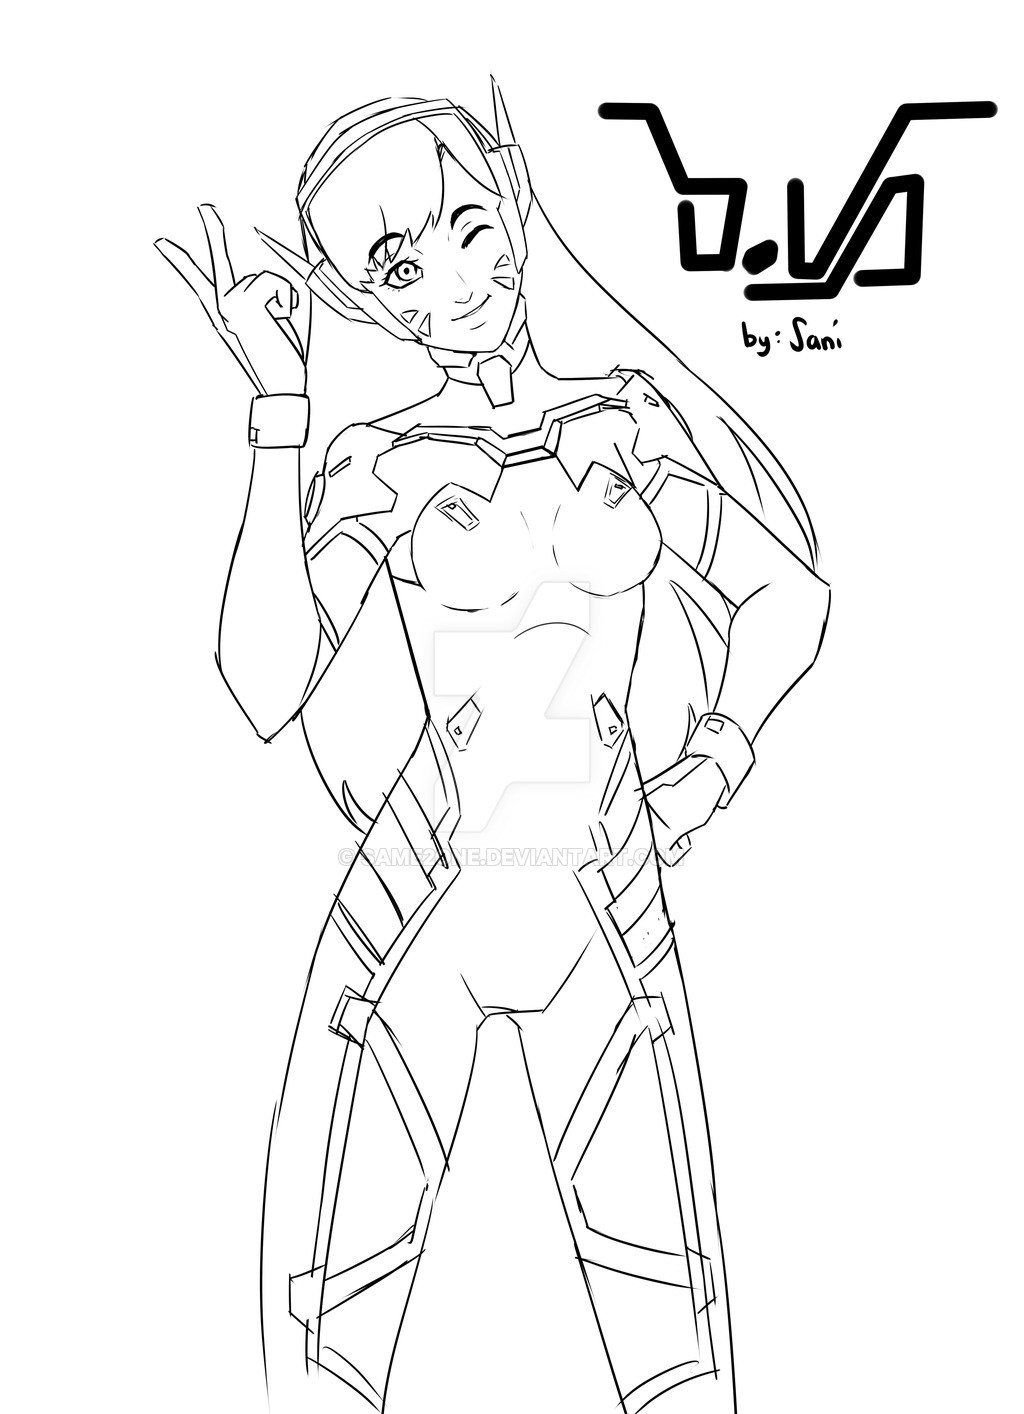 Genji Coloring Pages
 Genji Ultimate Overwatch Coloring Pages to Pin on